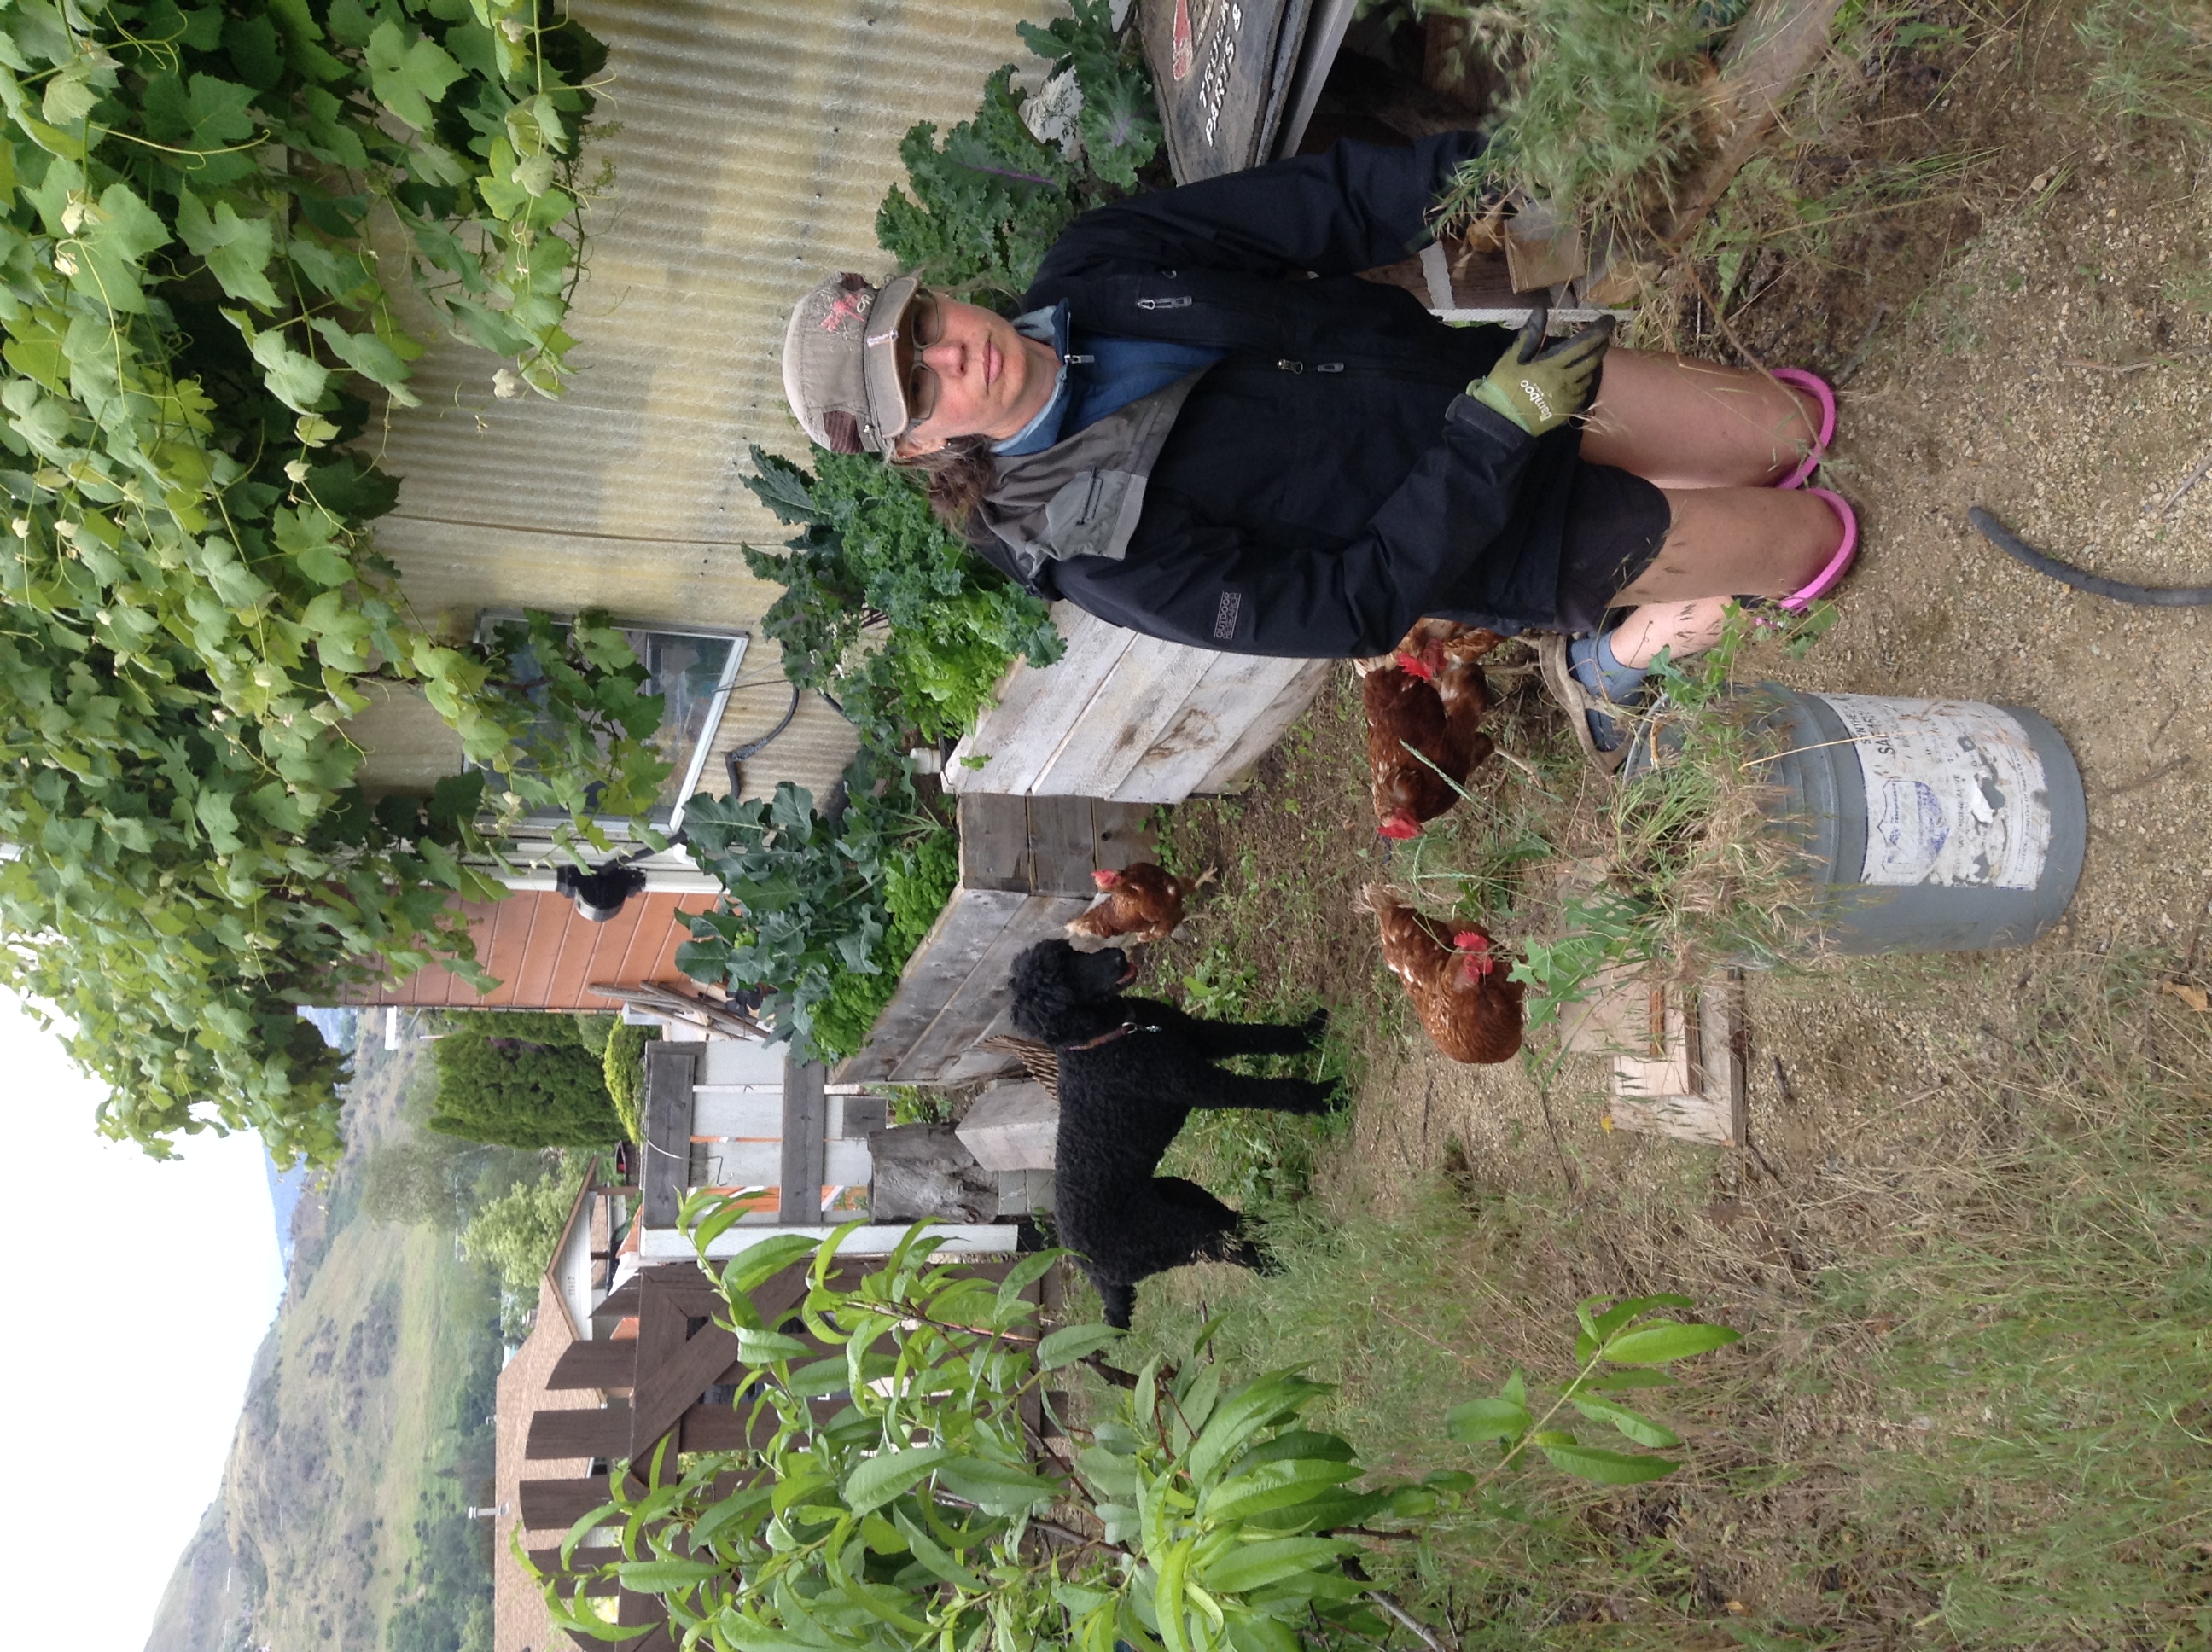 Woman wearing hat, glasses, jacket, shorts and gloves, kneels in garden with poodle and chickens, surrounded by plants